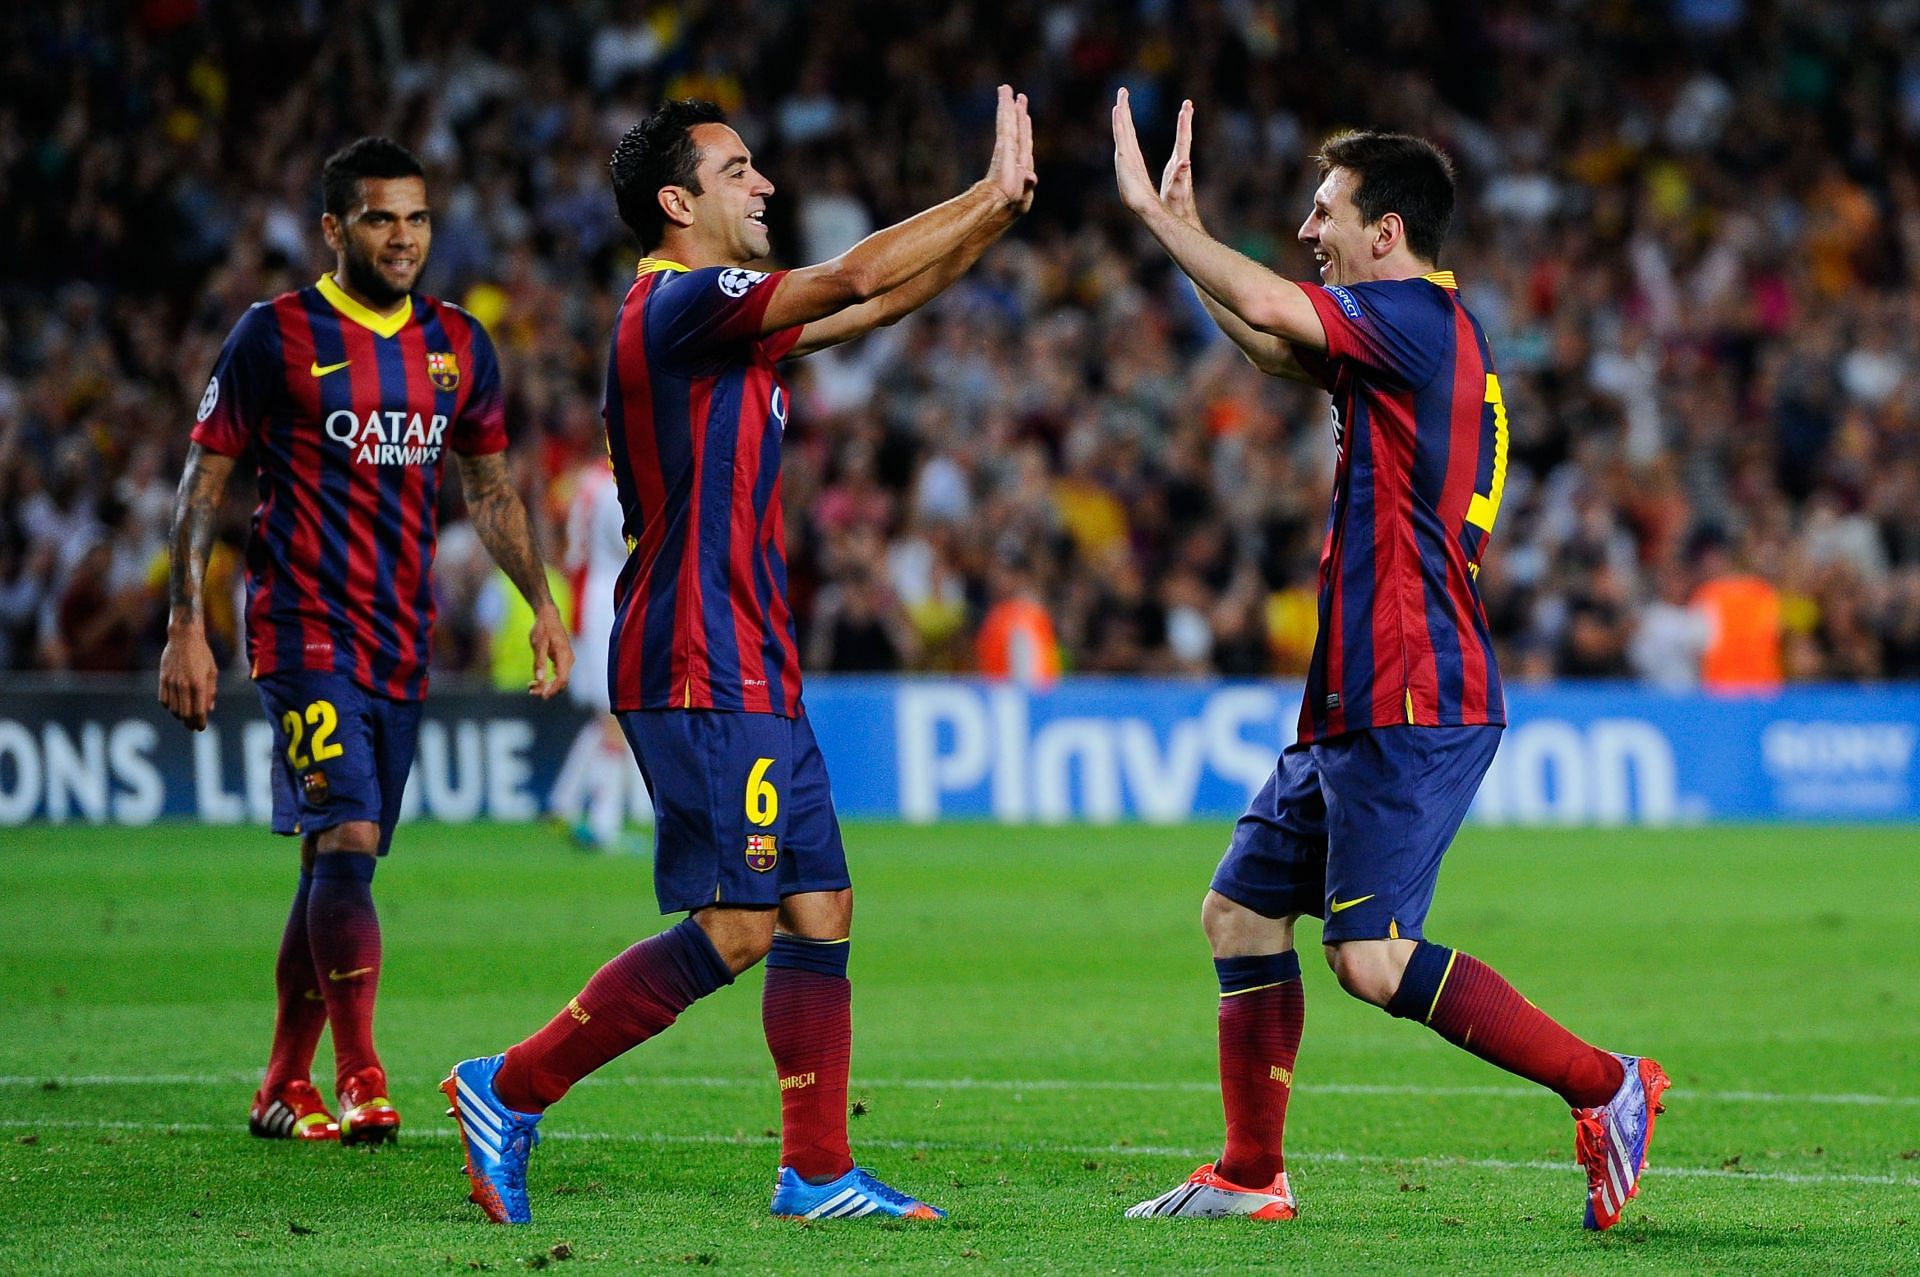 Xavi (centre) and Lionel Messi celebrate a goal during their playing days at FC Barcelona.